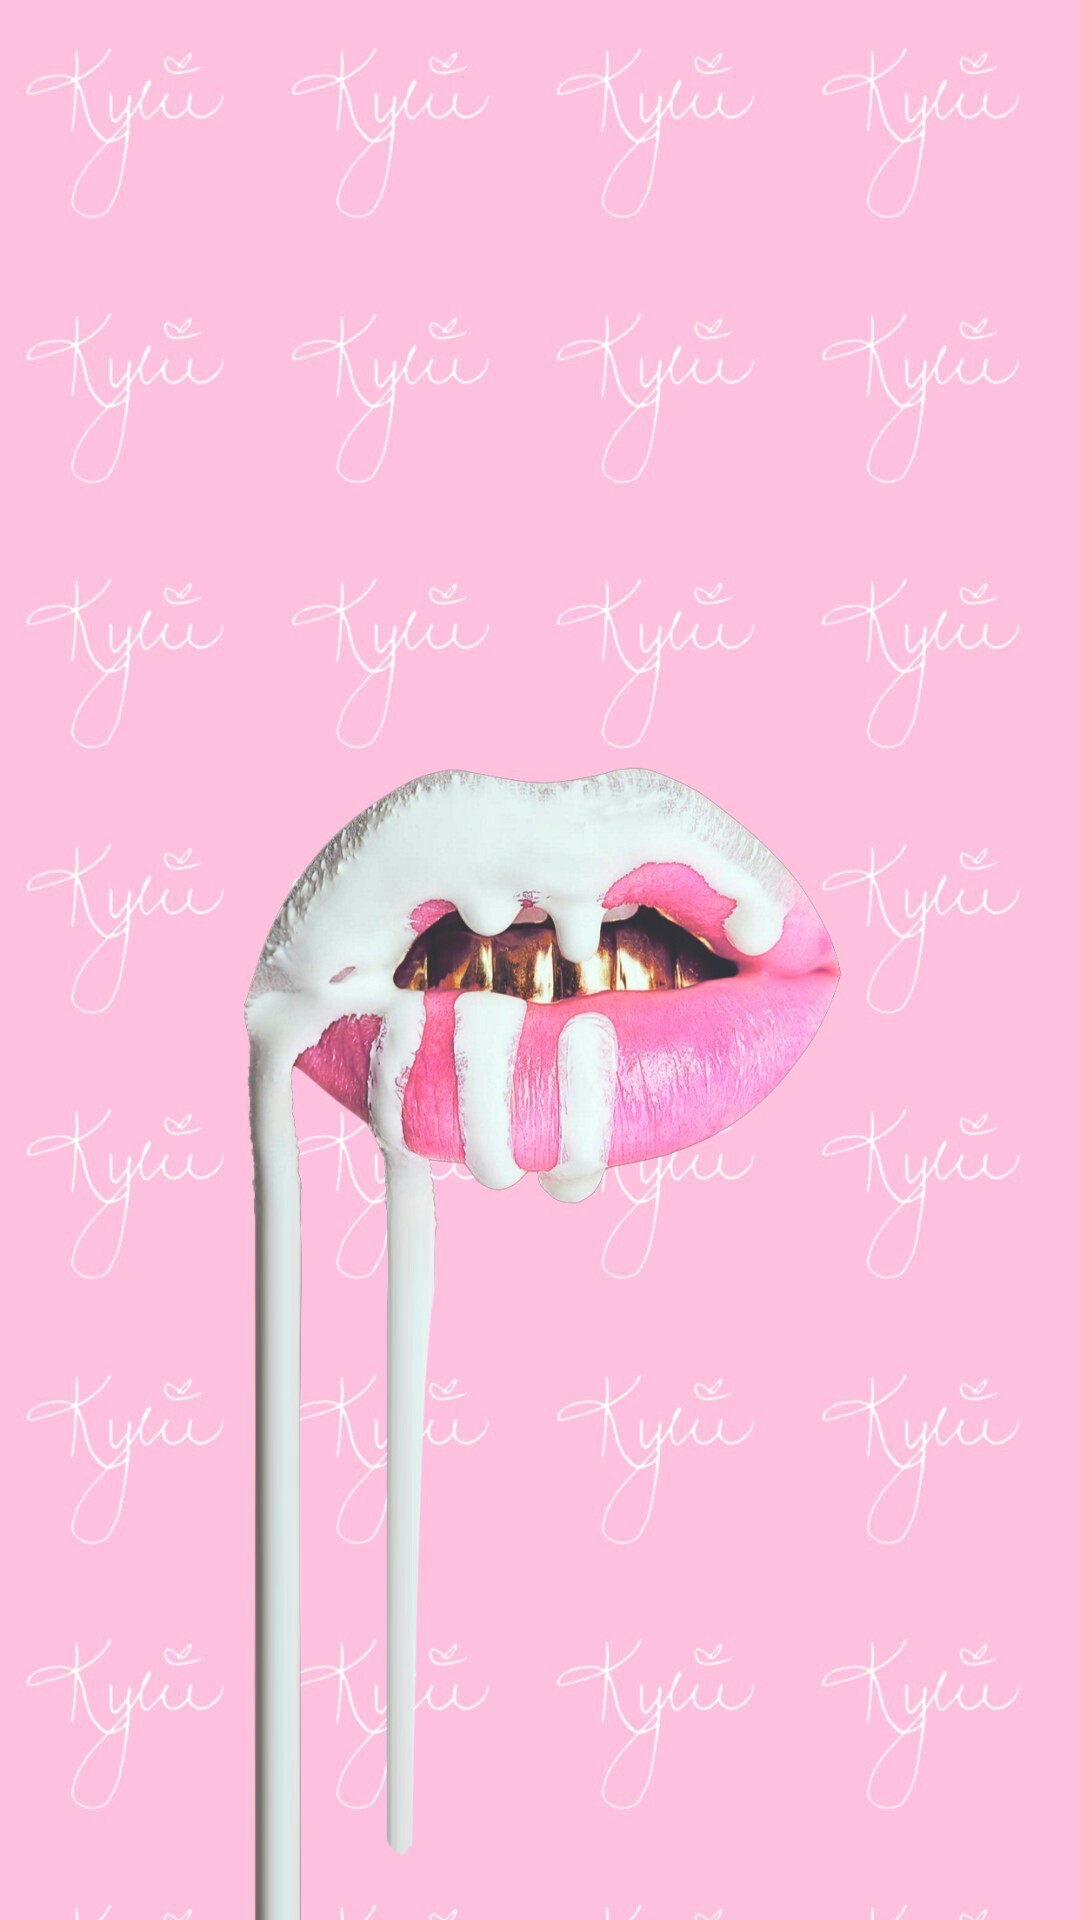 1080x1920 Image de kylie jenner, wallpaper, and lips